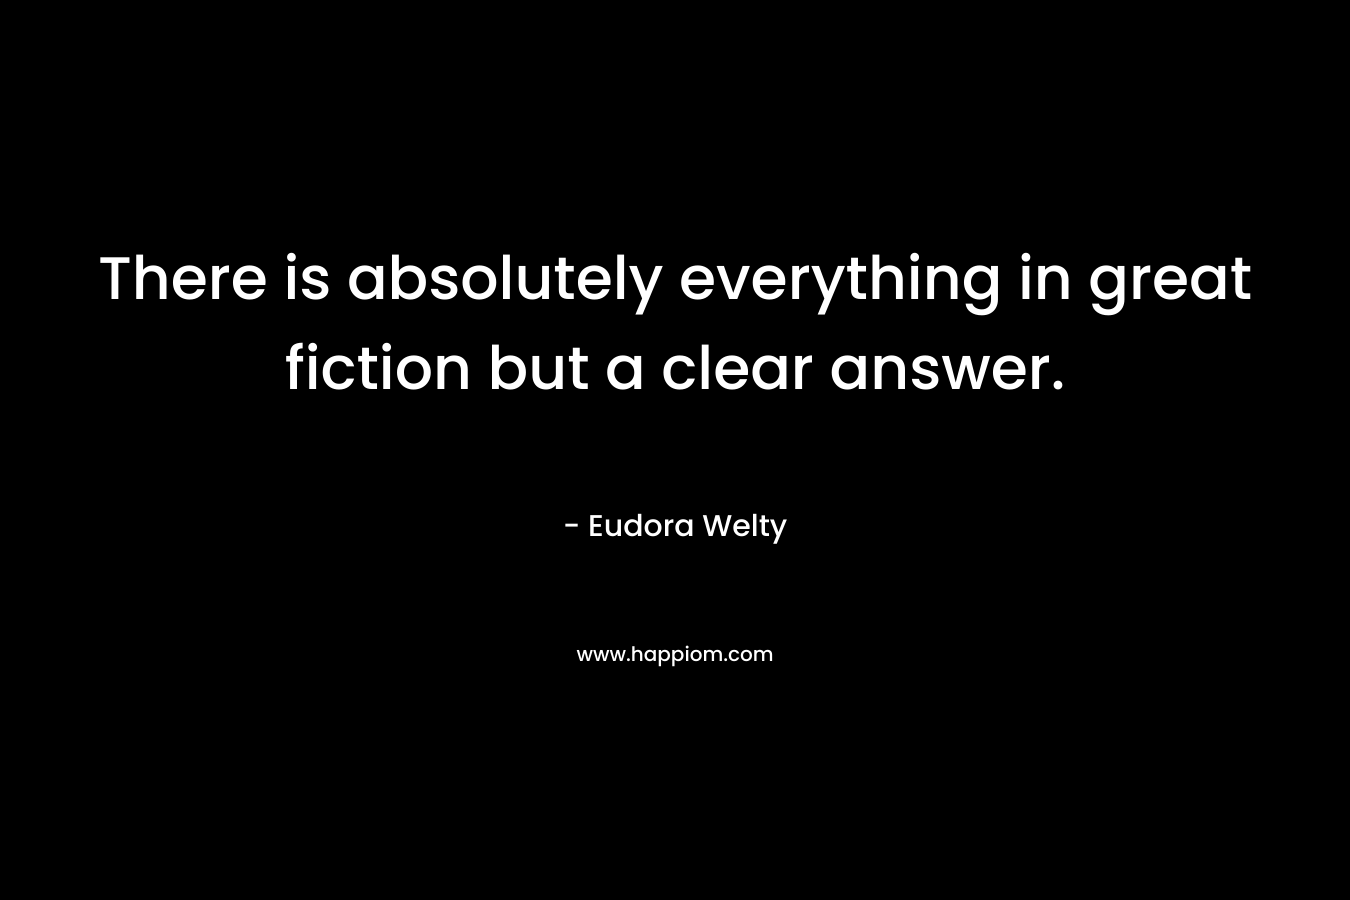 There is absolutely everything in great fiction but a clear answer. – Eudora Welty